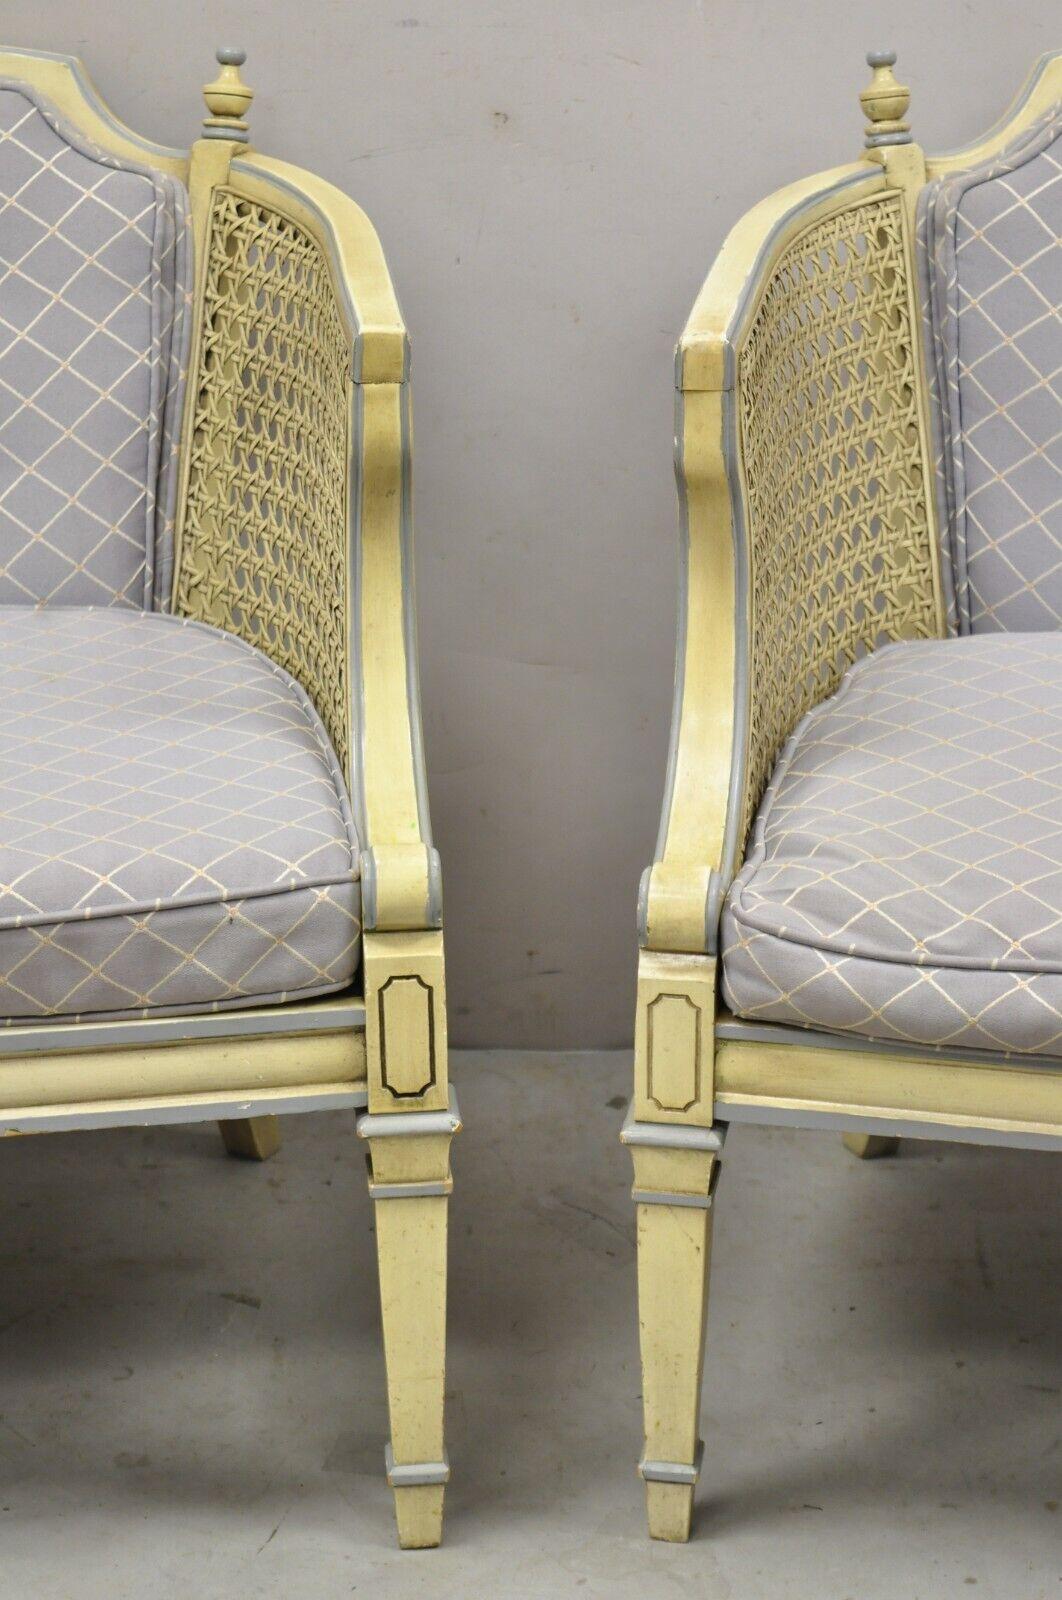 Vintage Hollywood Regency Cream Painted Cane Side Club Lounge Chairs, Pair For Sale 6